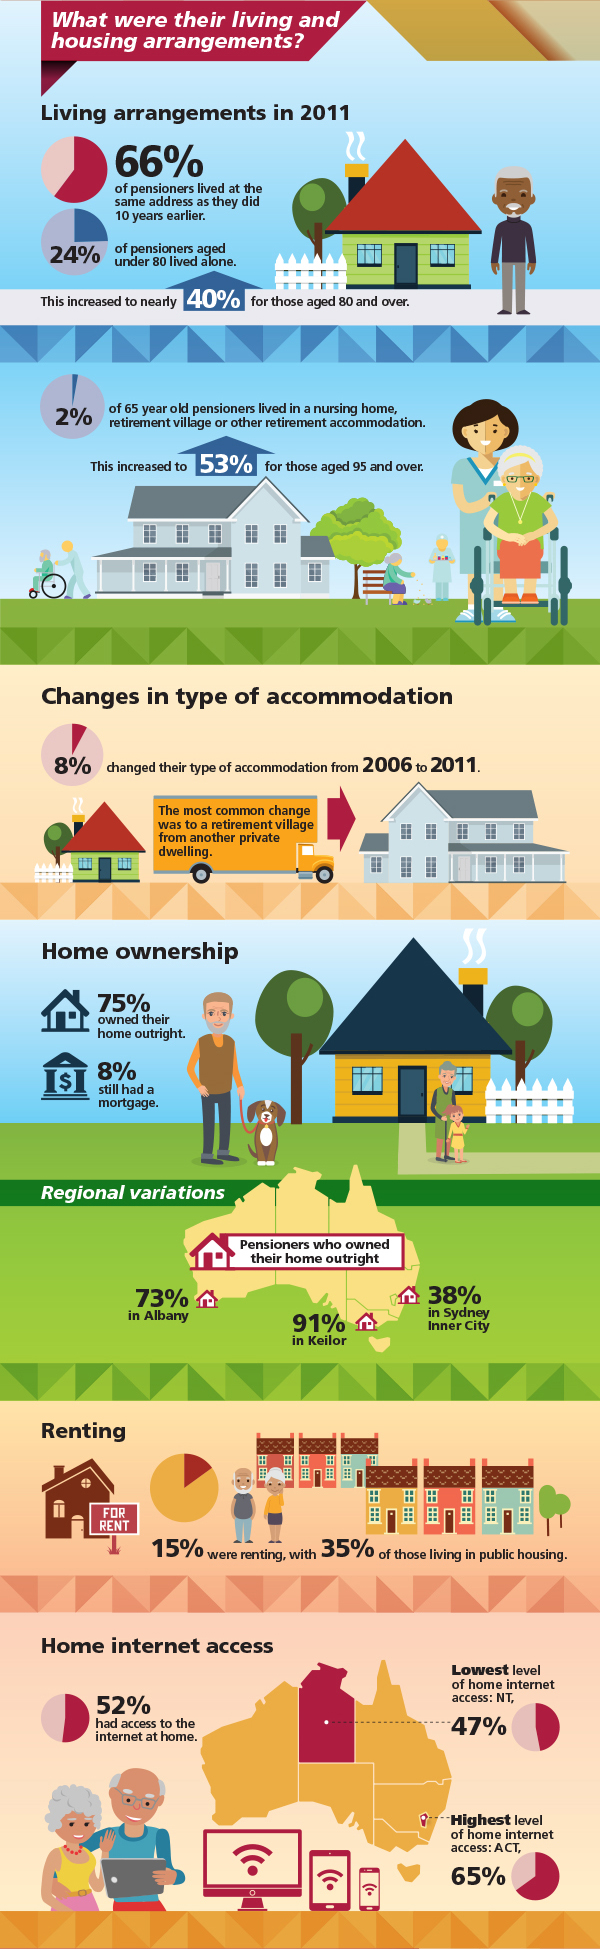 Image: Infographic about the living arrangements of Australians on the Age Pension. Data repeated in text below